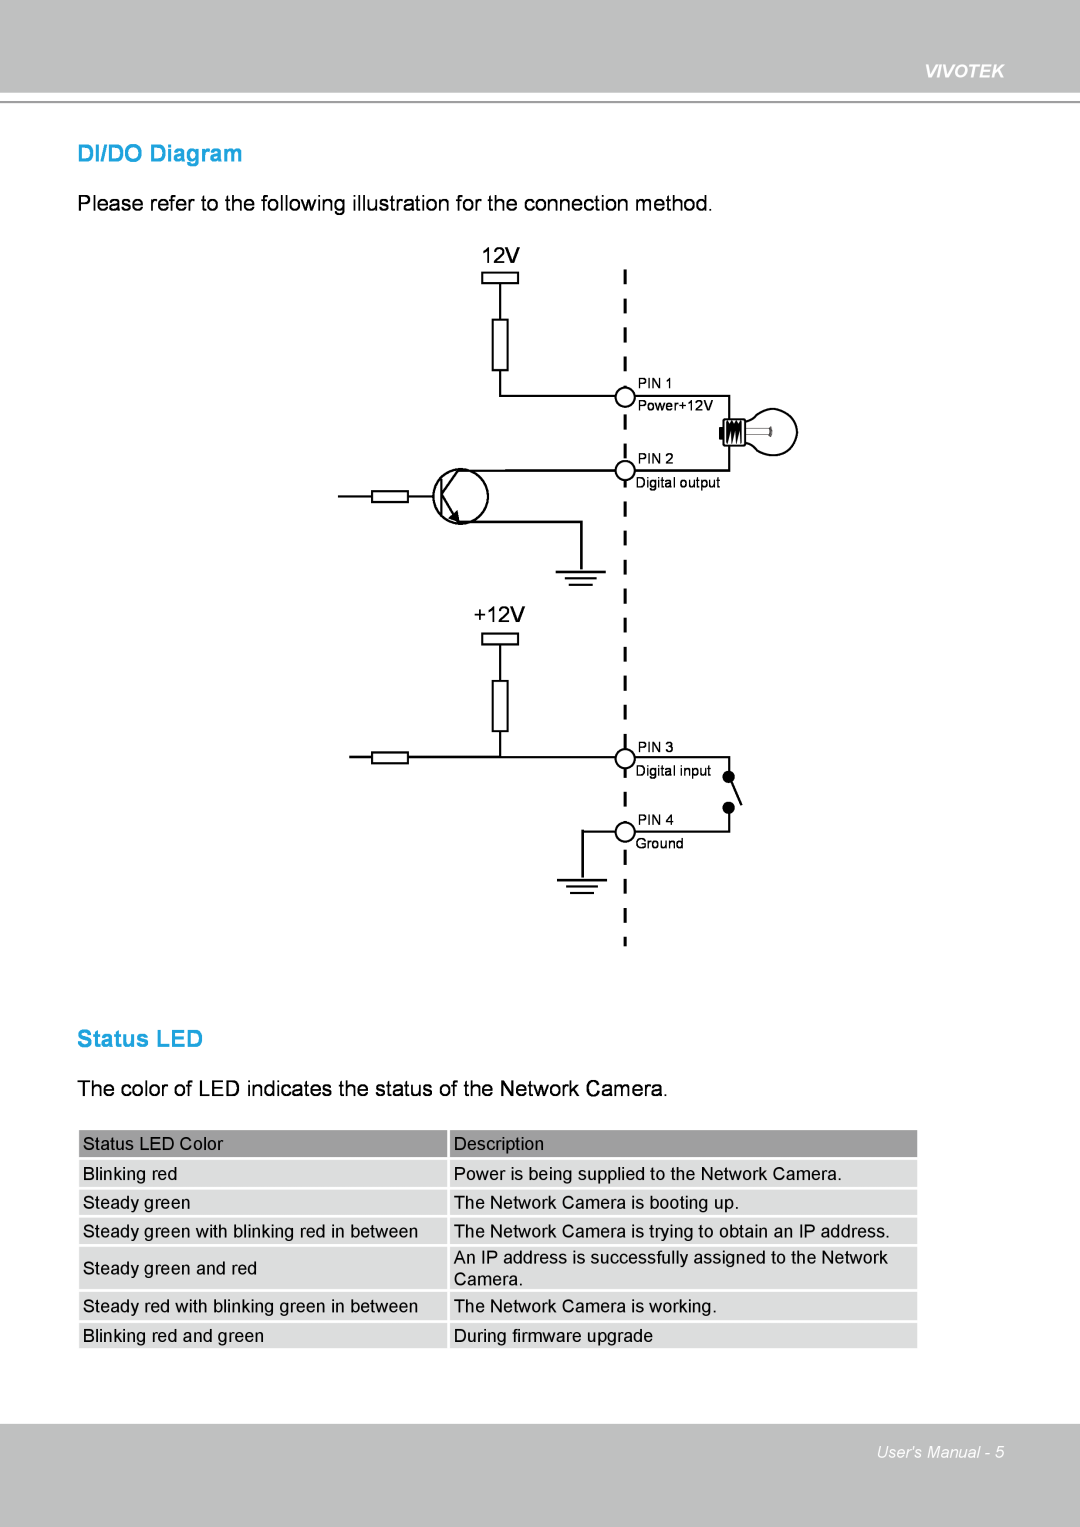 Vivotek PZ7132 manual DI/DO Diagram, Status LED, Please refer to the following illustration for the connection method, +12V 